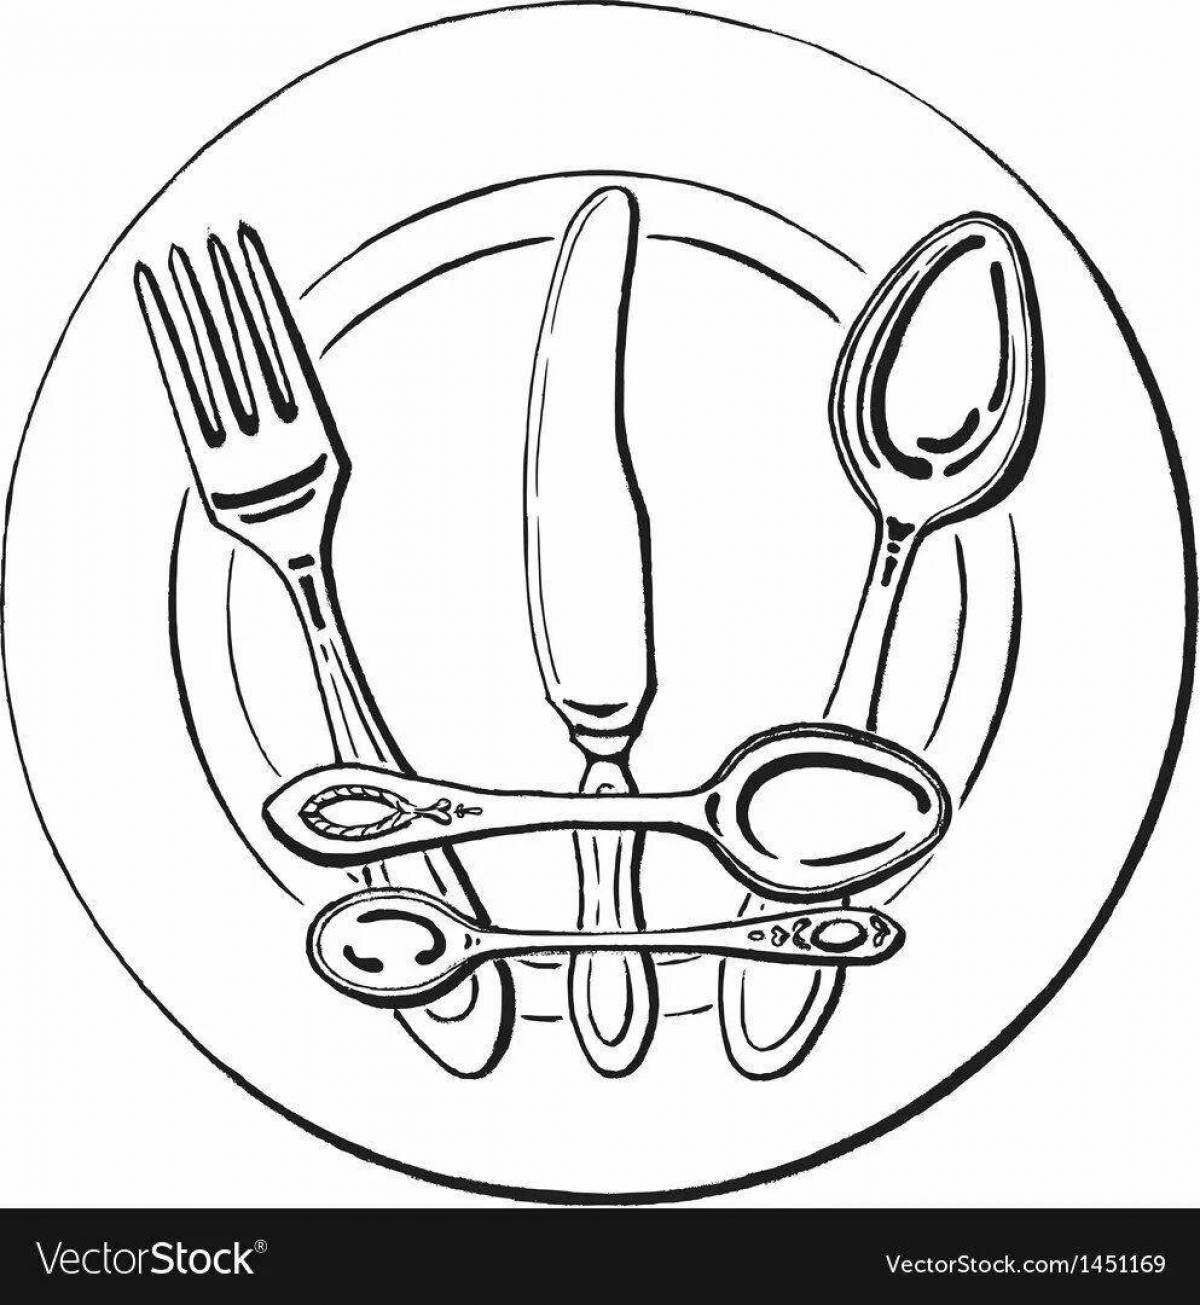 Mysterious cutlery coloring page